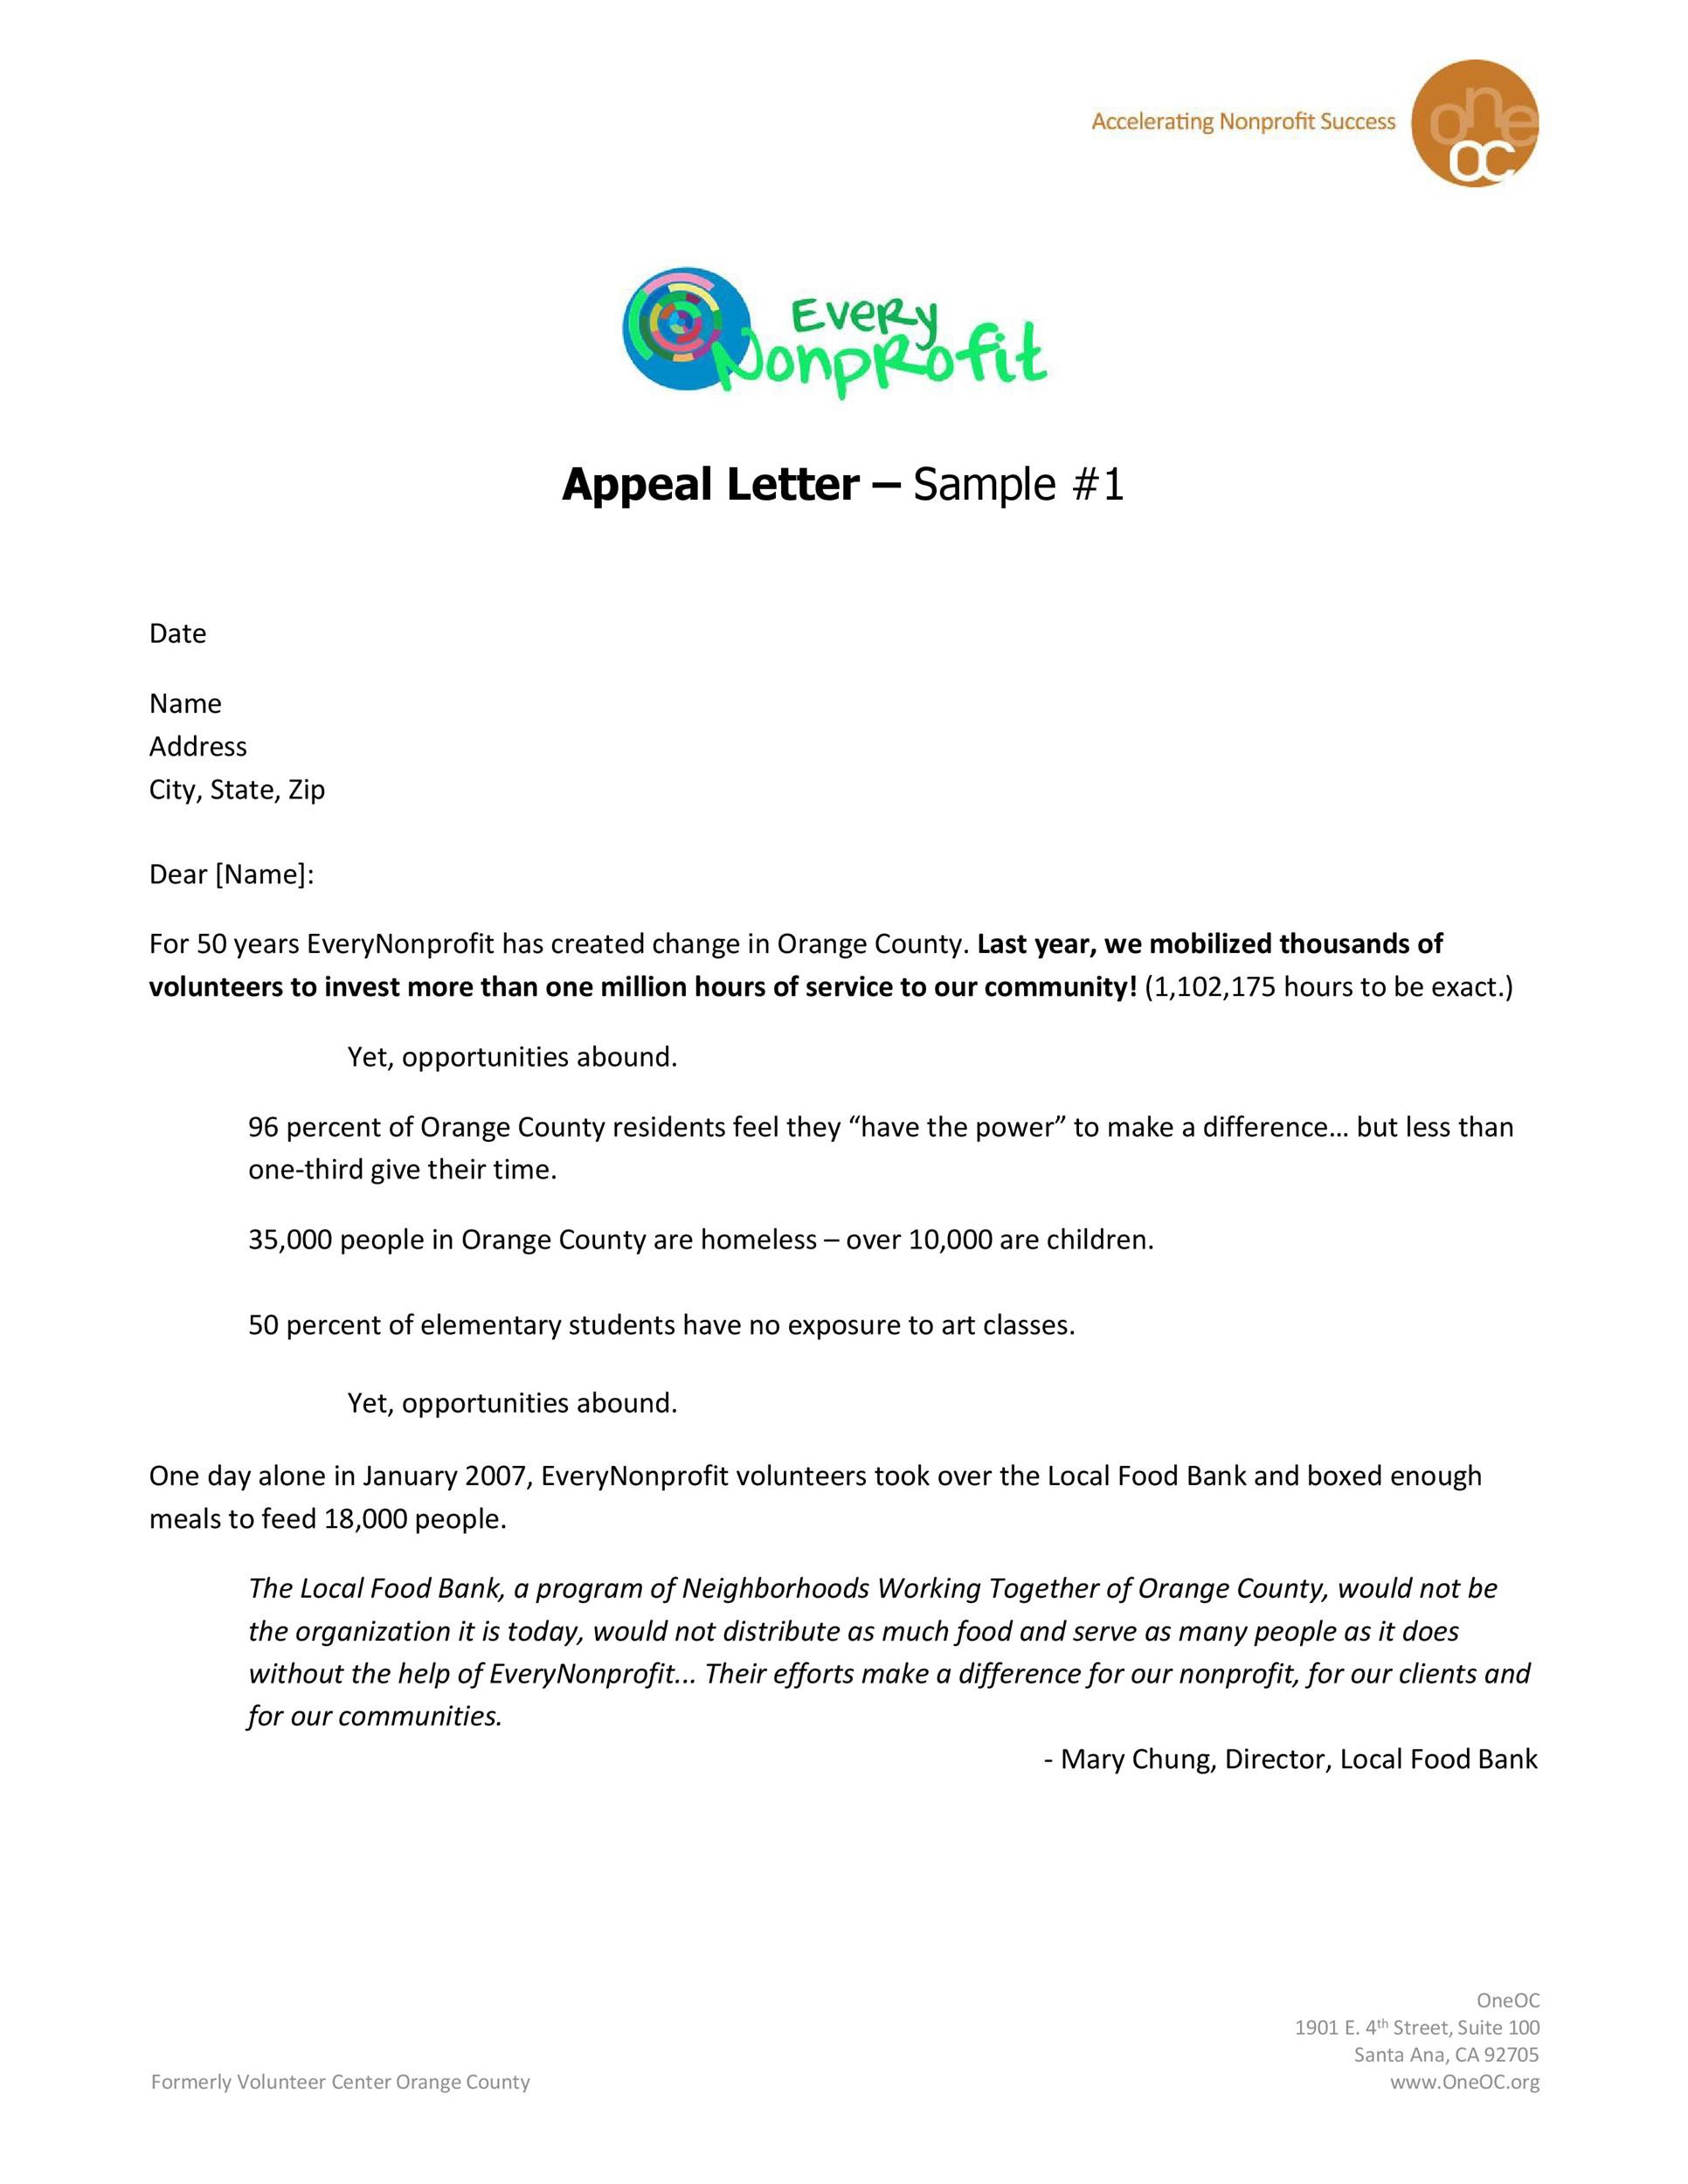 43 Effective Appeal Letters (Financial Aid, Insurance, Academic) How To Write An Appeal